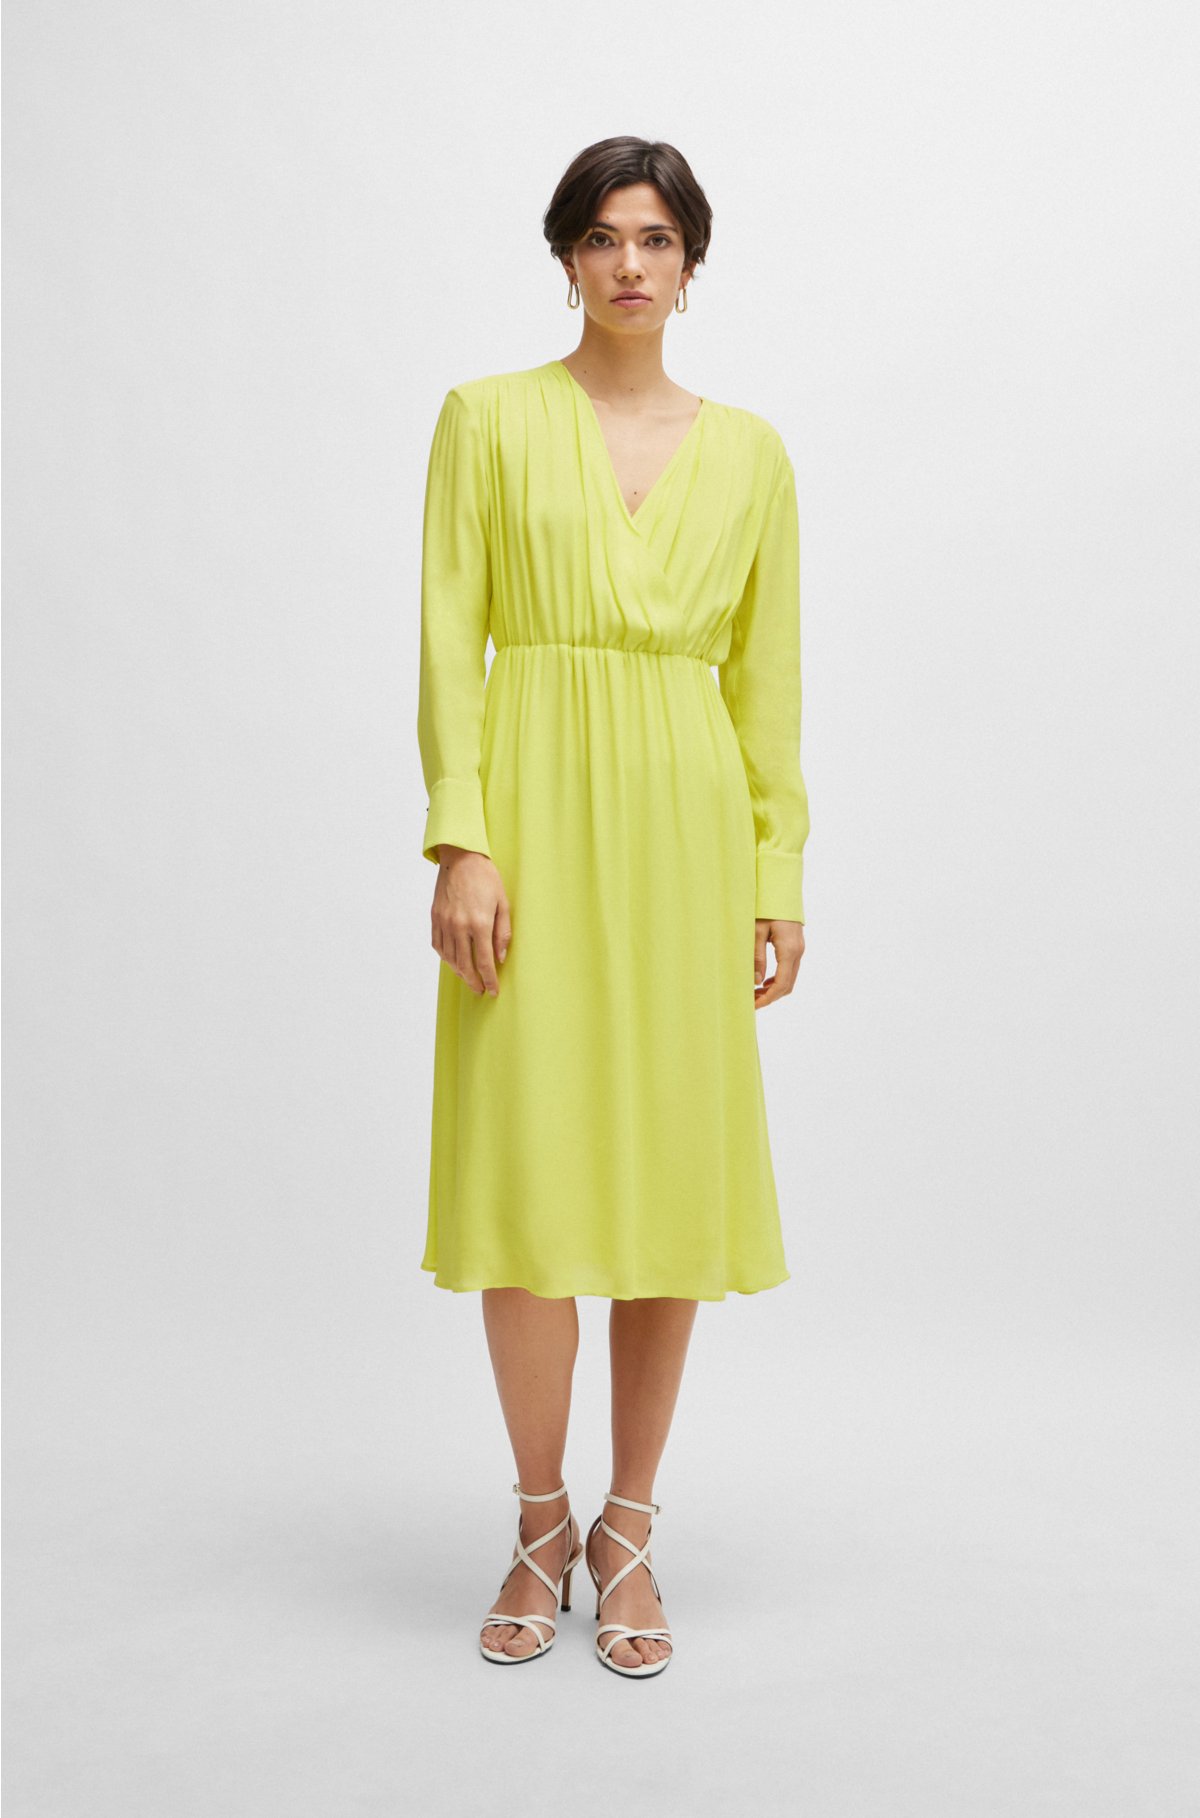 Regular-fit dress with wrap front and button cuffs, Yellow